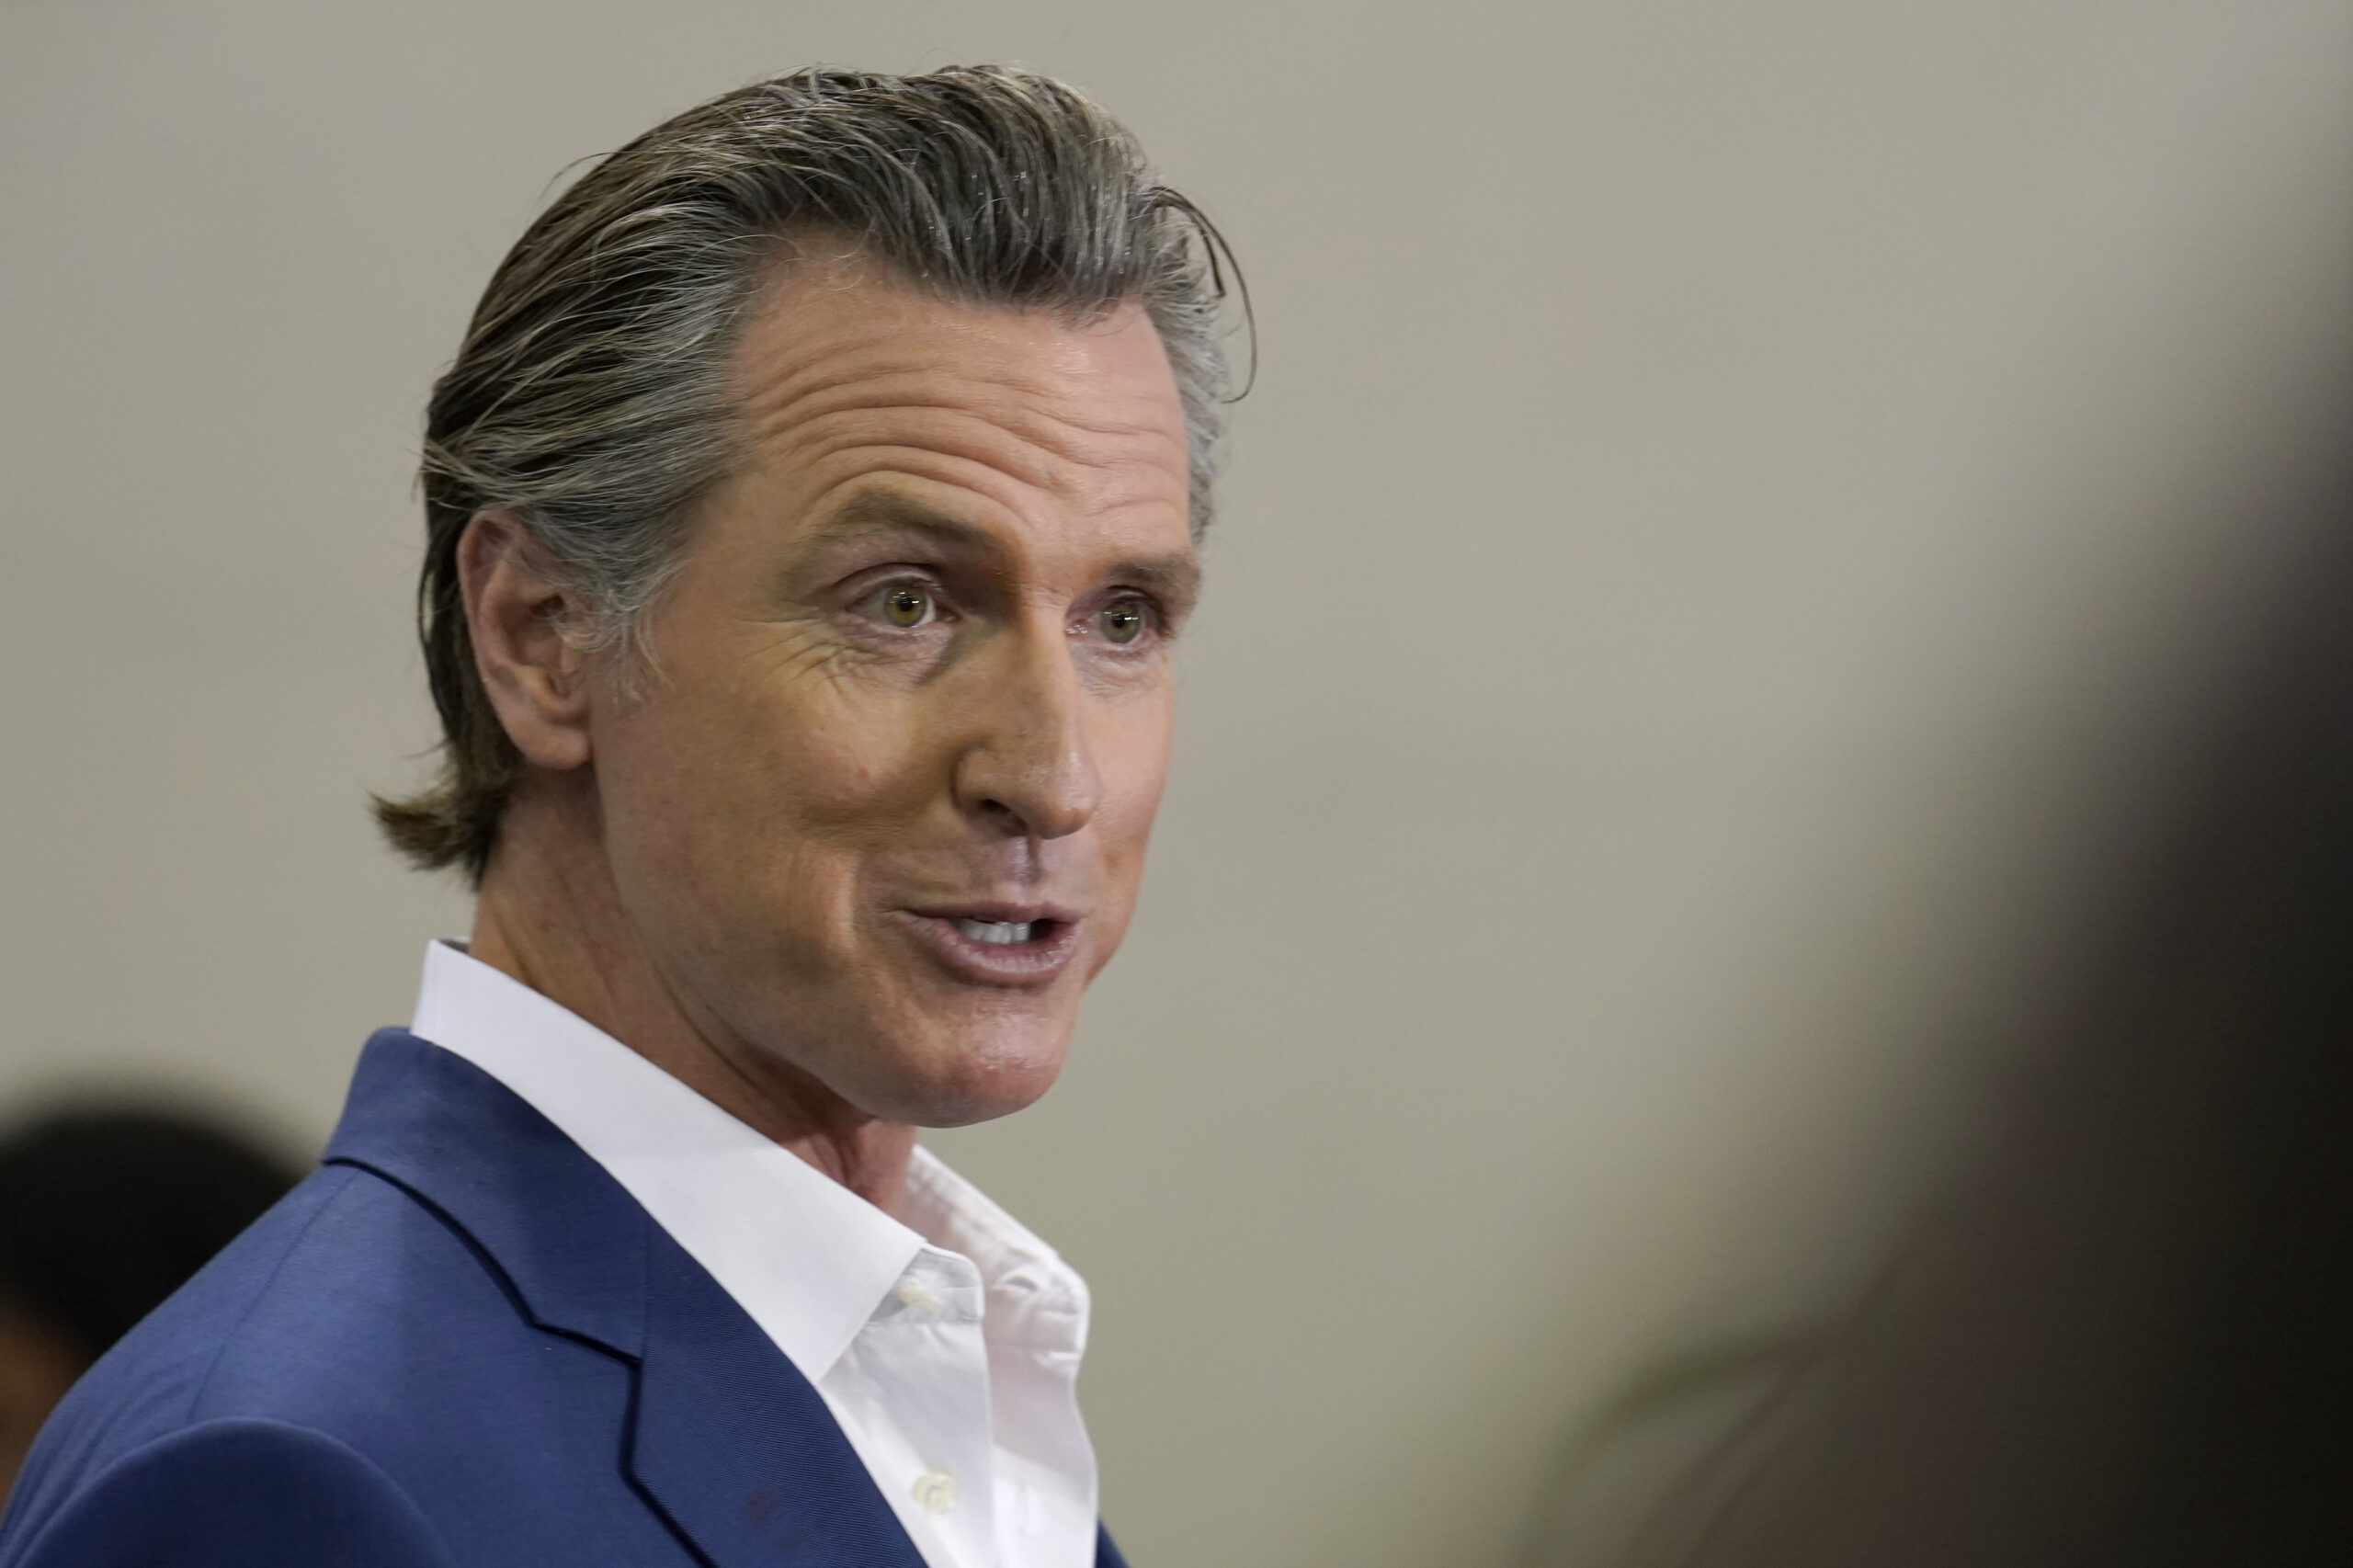 ‘You Small, Pathetic Man’: Newsom Slams DeSantis After New Plane of Migrants Lands in California